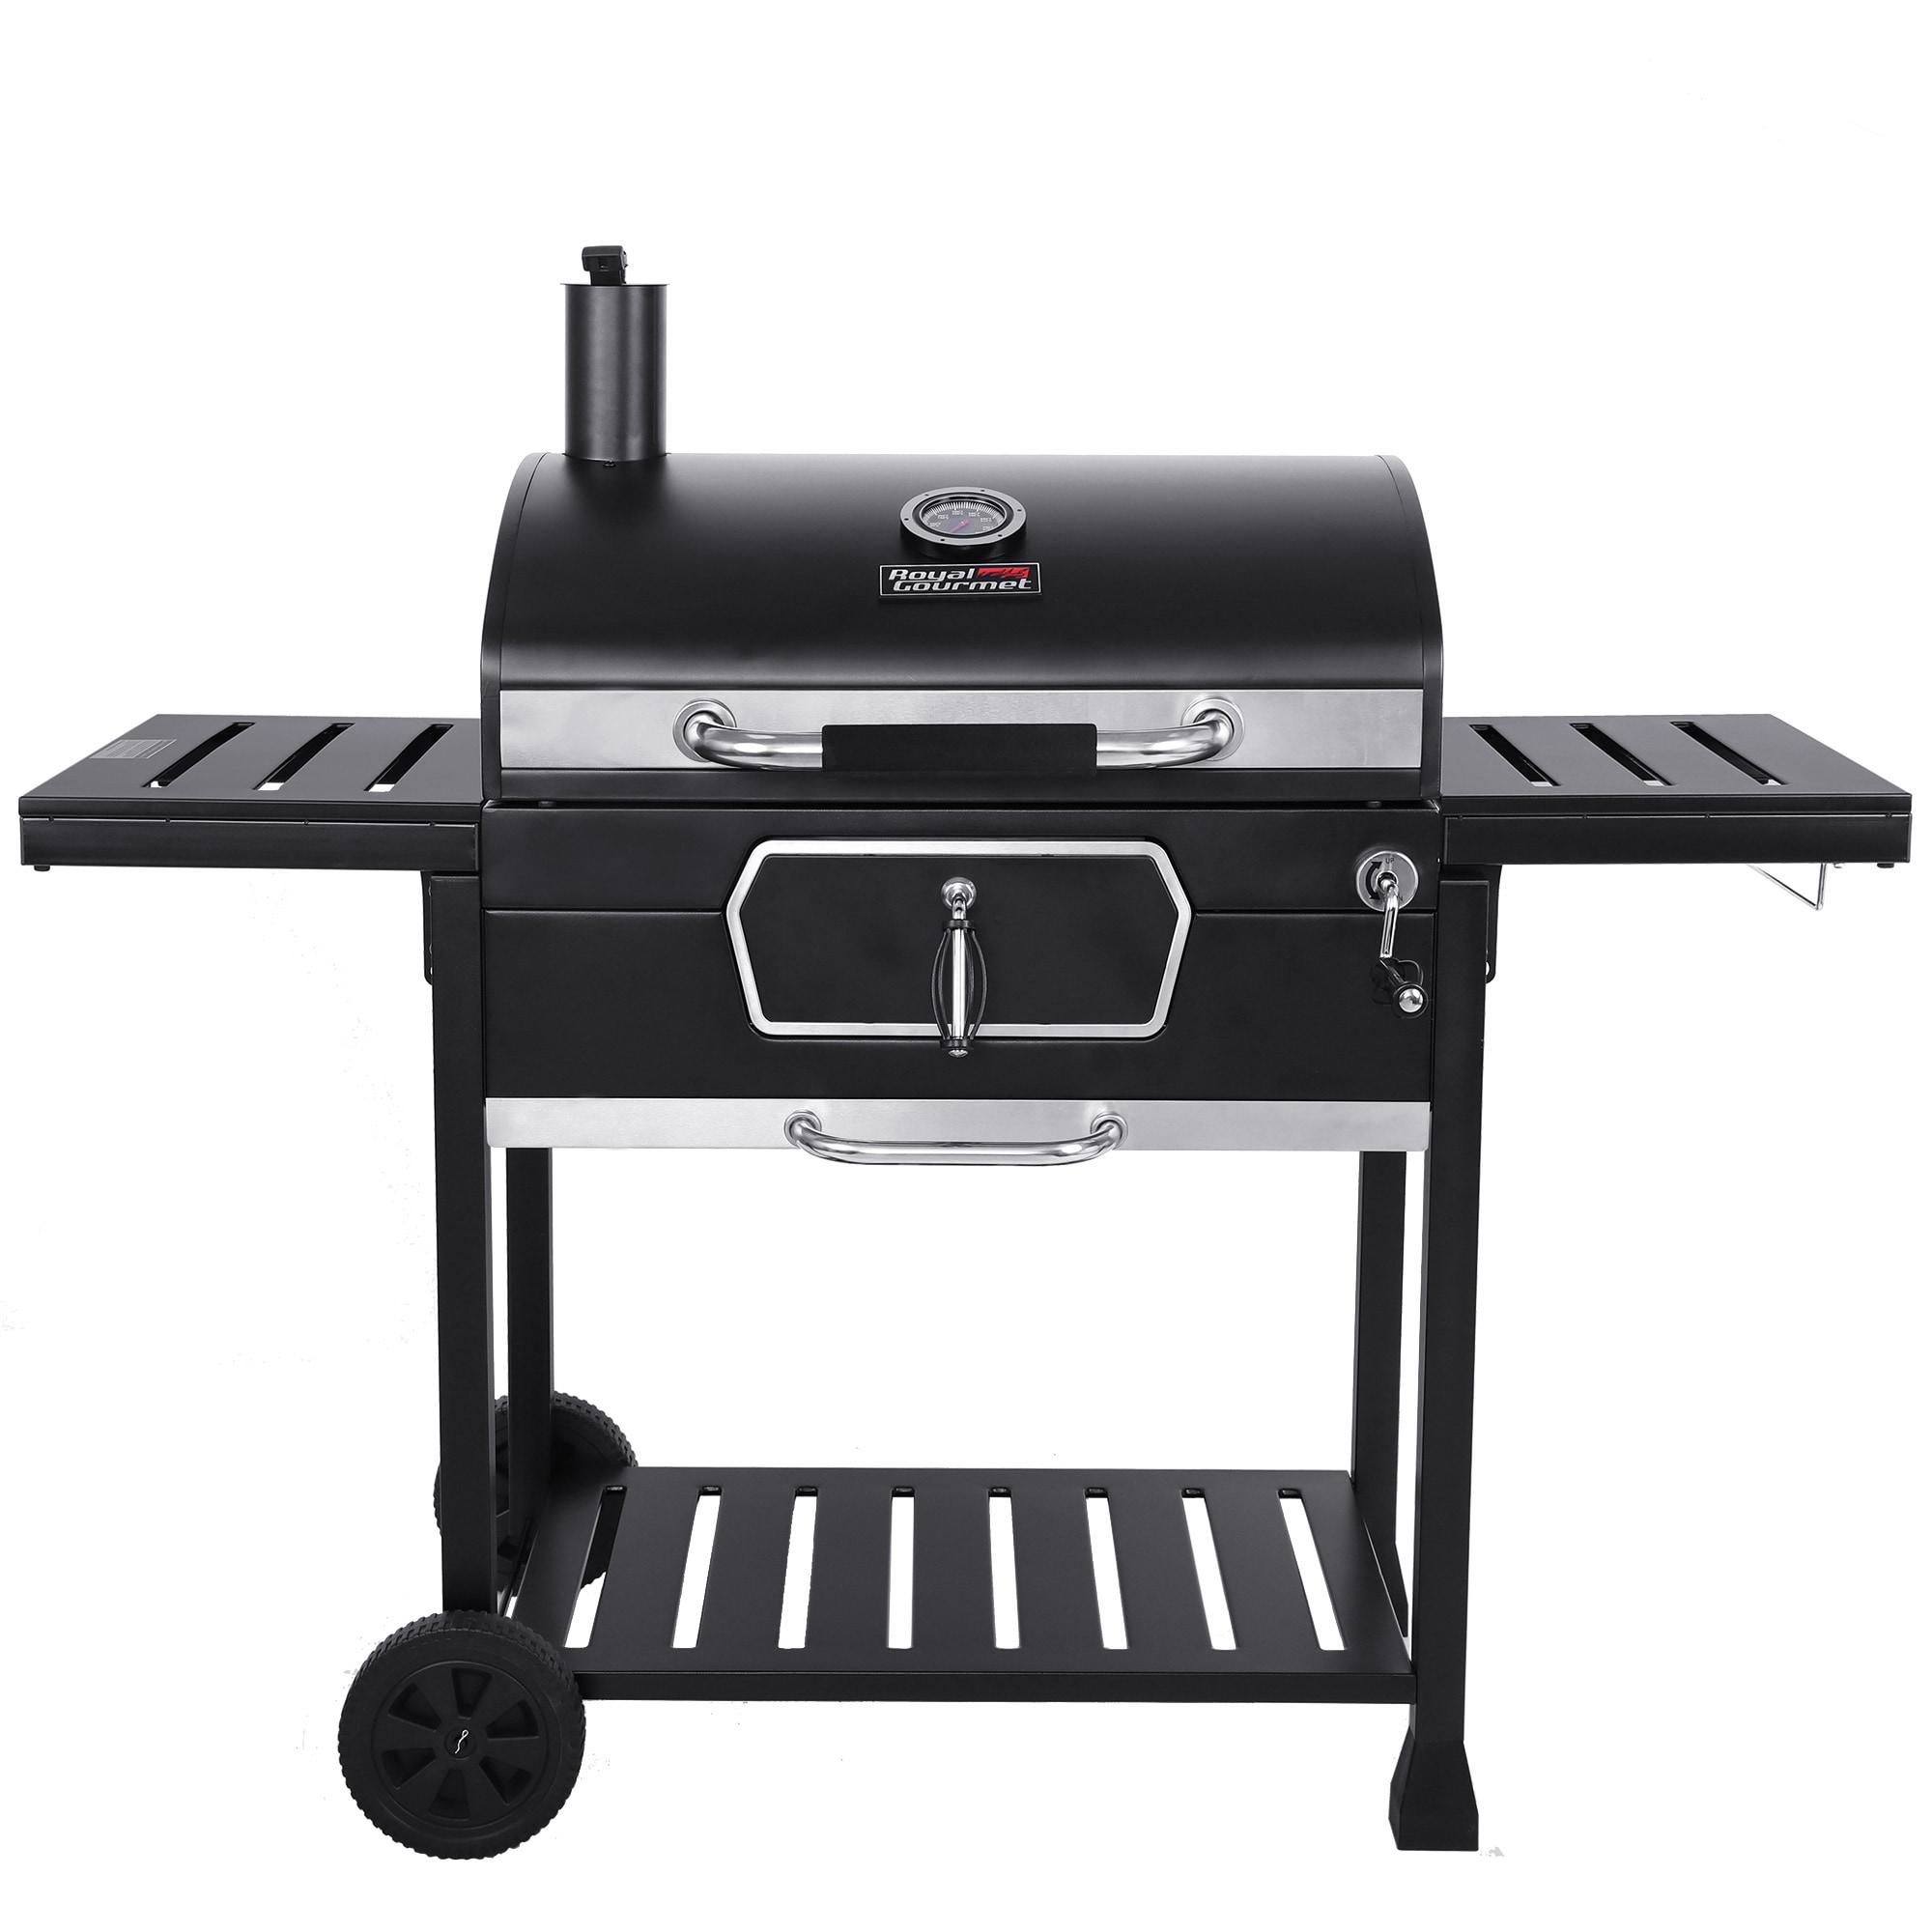 Commercial Portable Outdoor Charcoal BBQ Grills Backyard Party